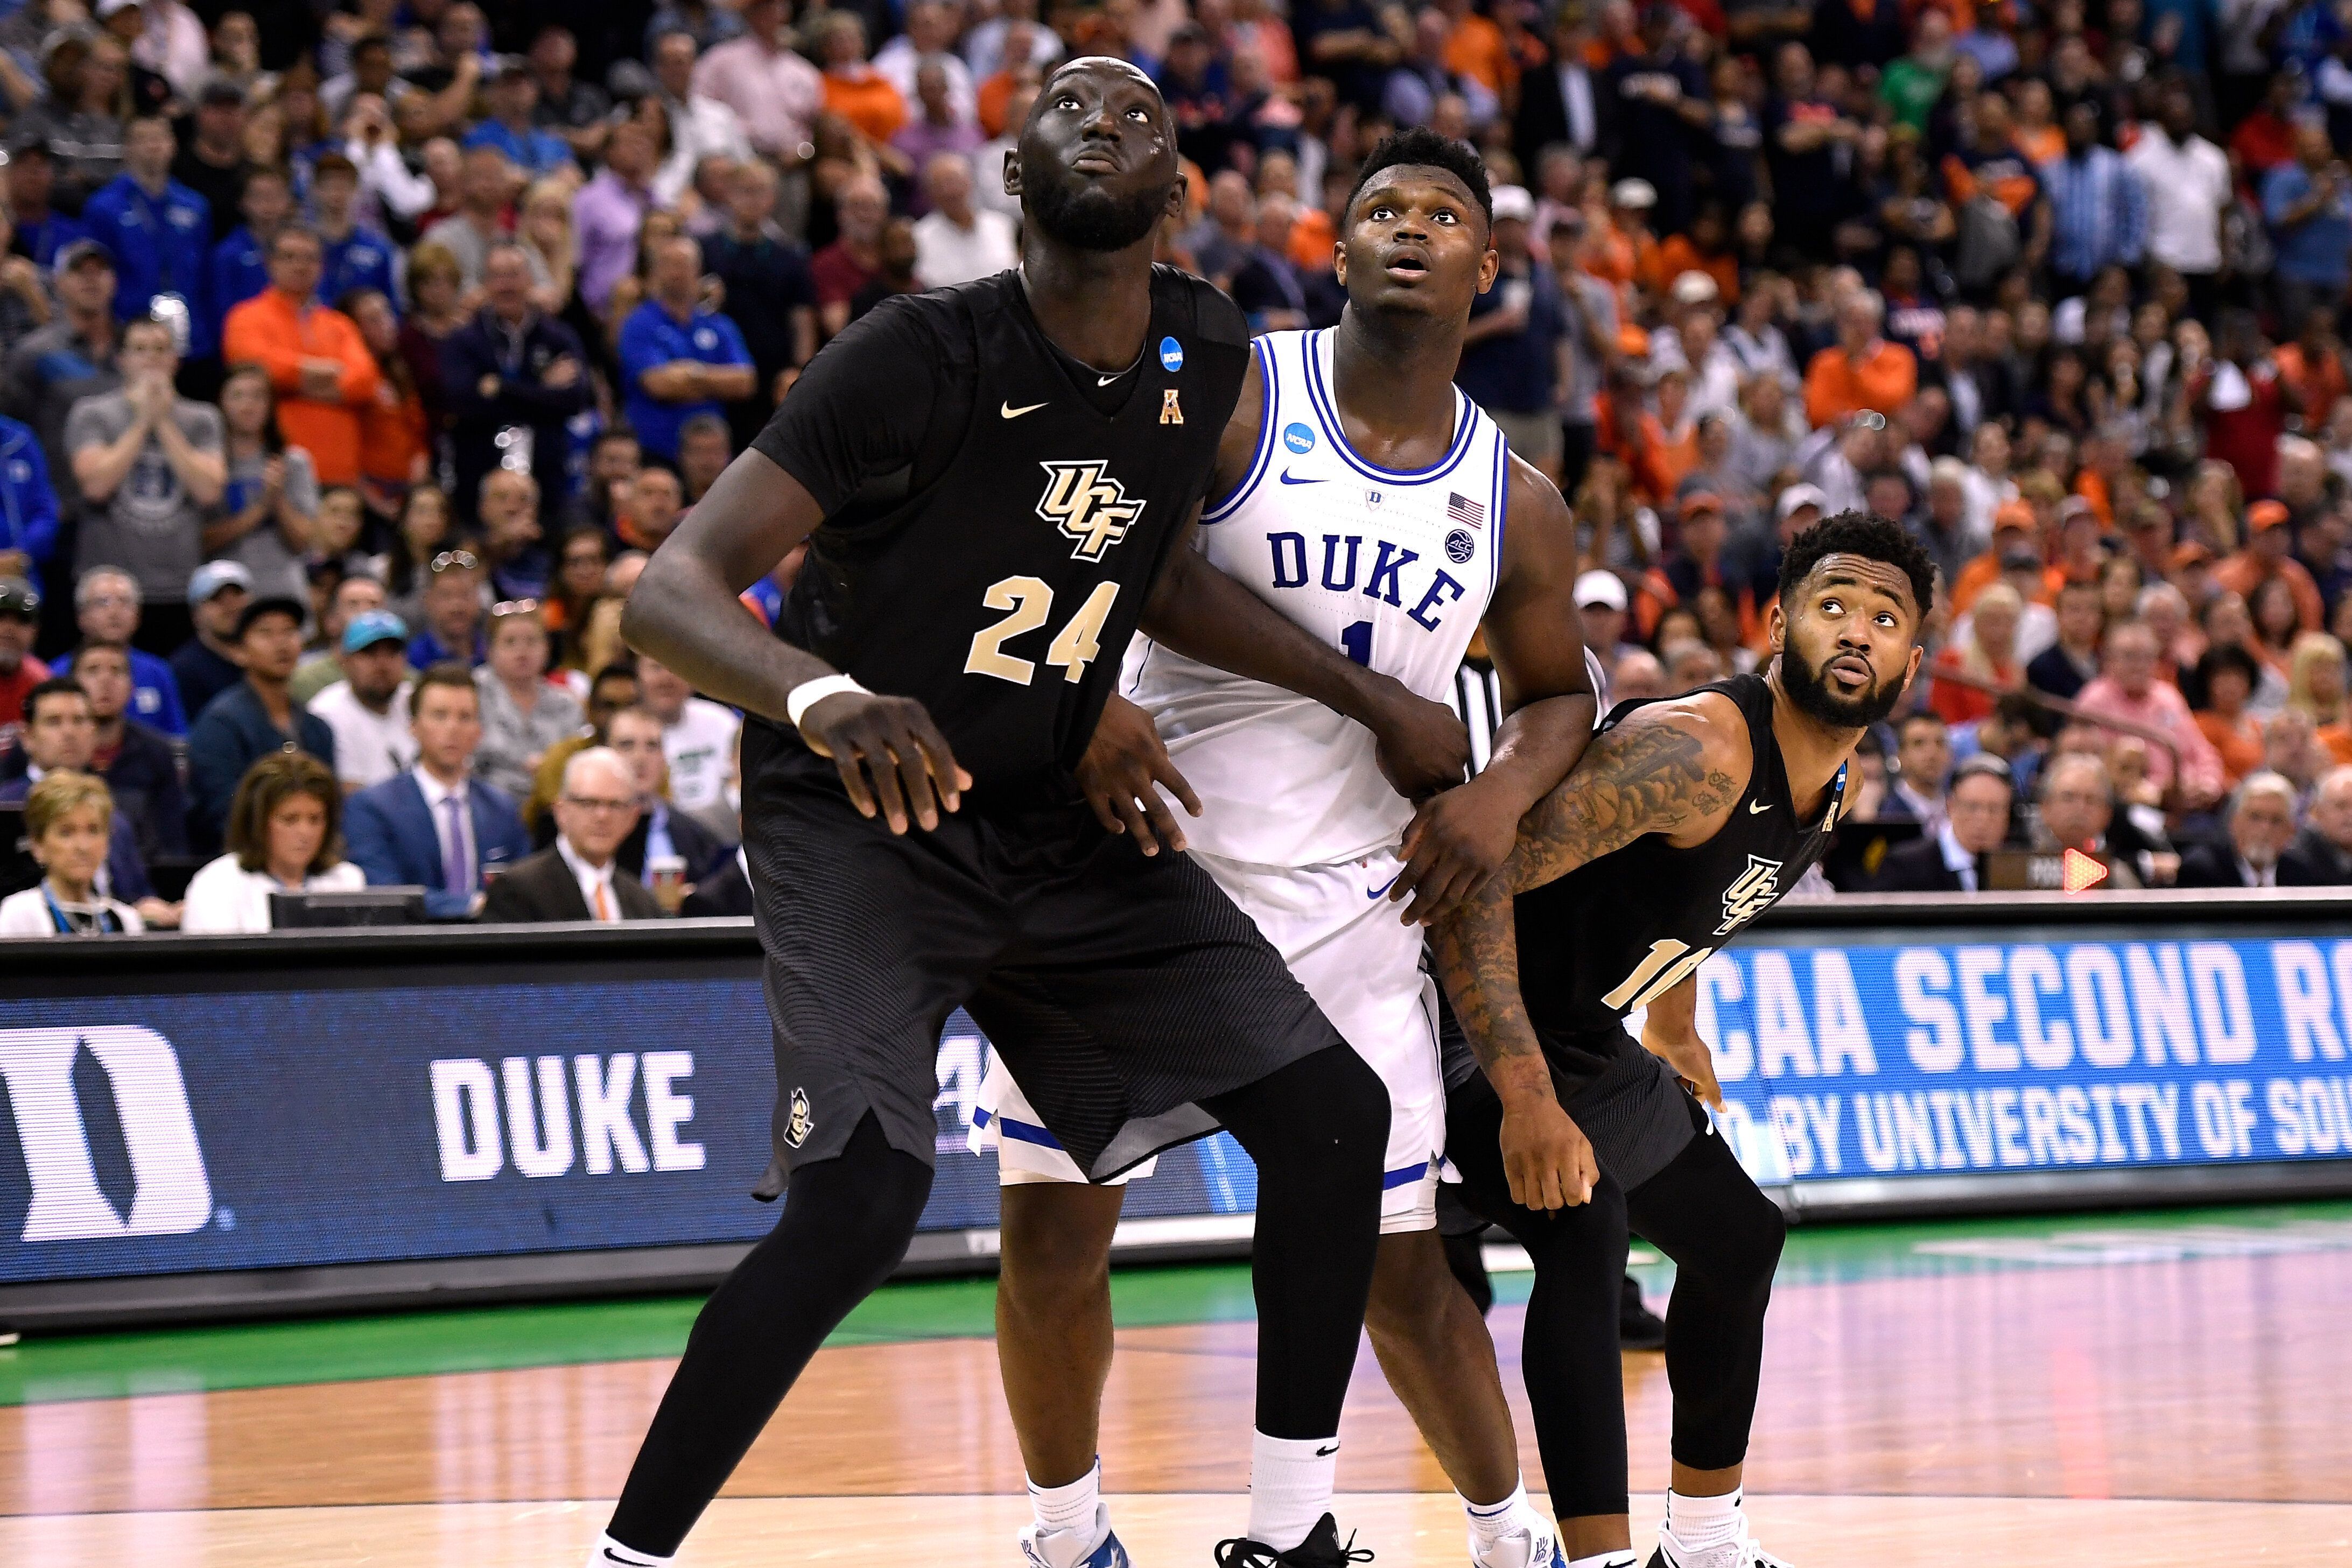 Cavs Have PreDraft Workouts with UCF Center Fall and FS Shooting Guard